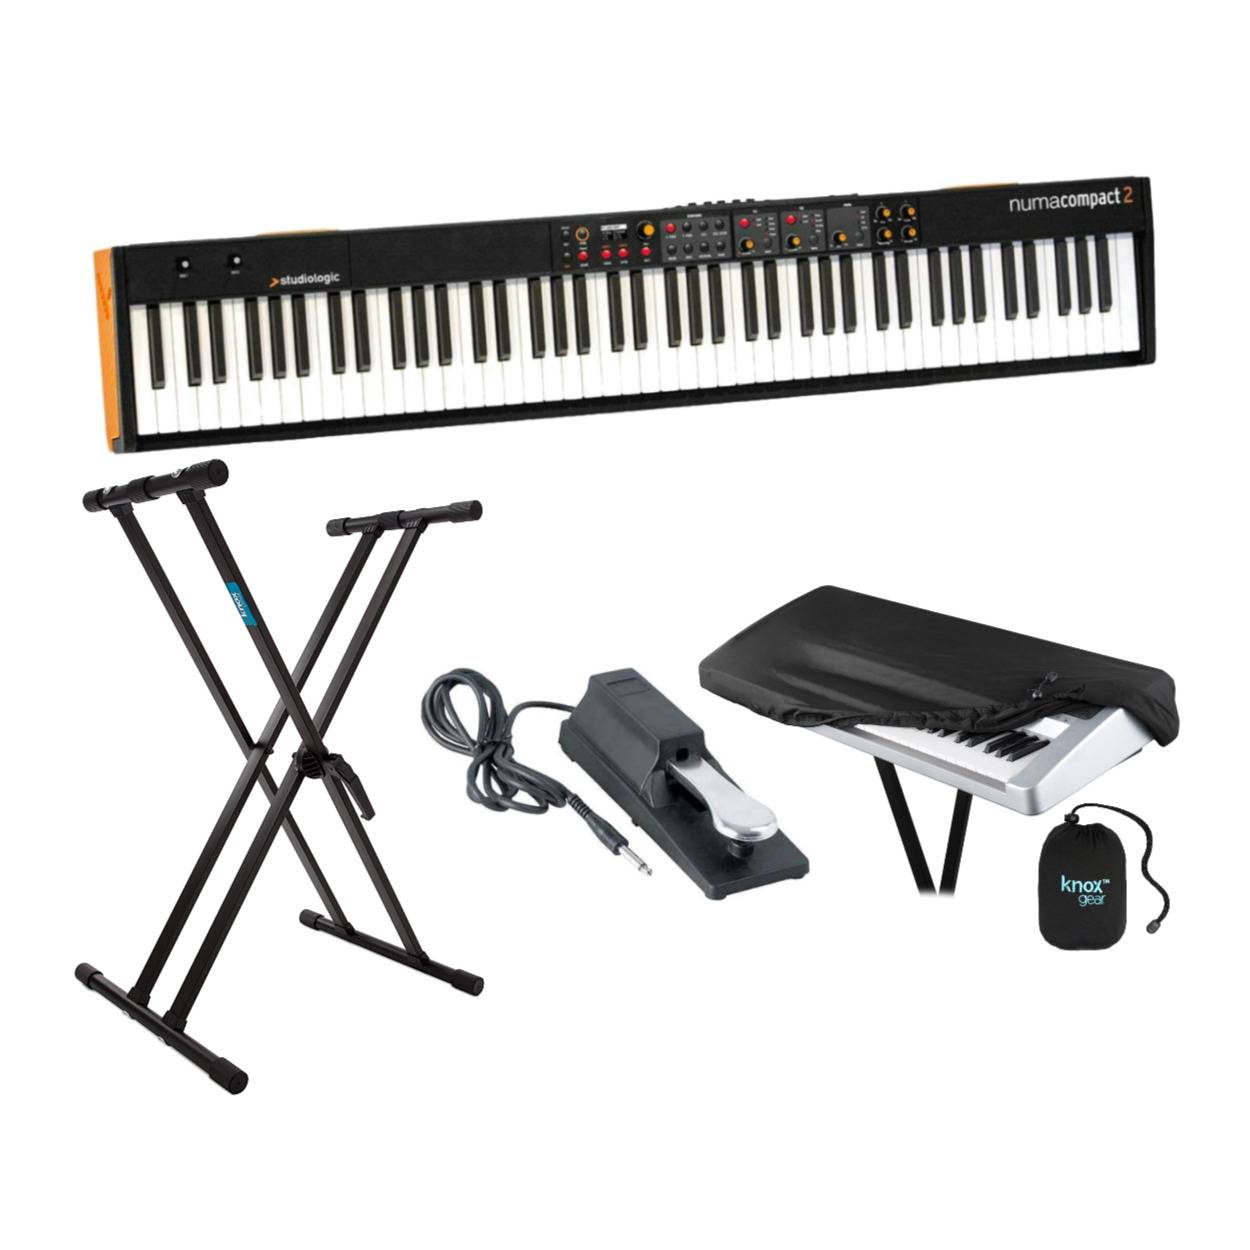 Studiologic Numa Compact 2 88-Key Semi-Weighted Keyboard with Stand, Sustain Pedal and Dust Cover